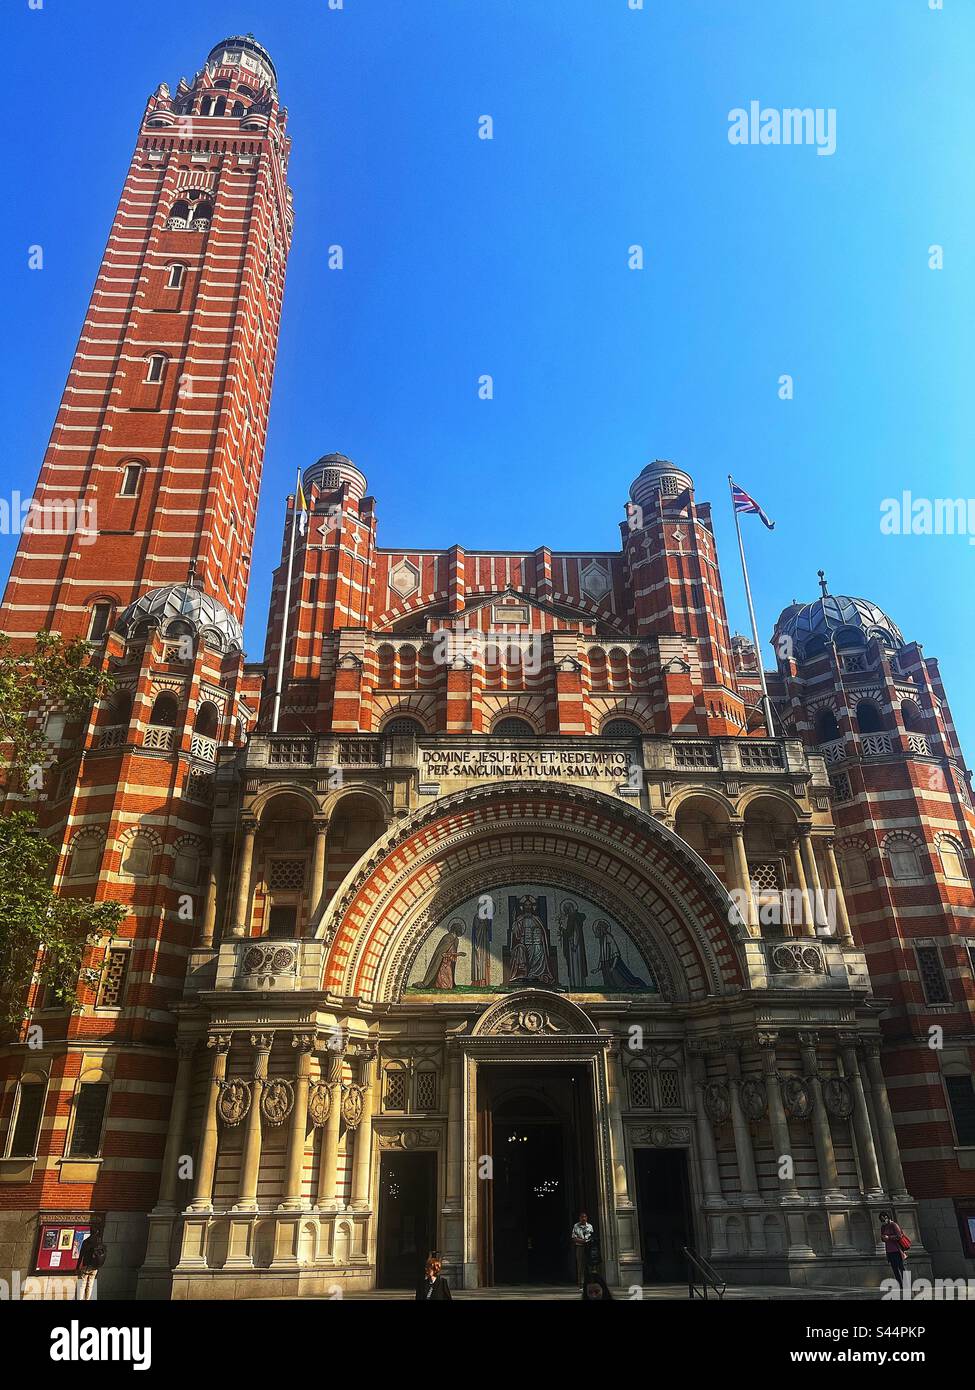 Brick built Westminster Roman Catholic Cathedral in Victoria, London, SW1 Designed by John Francis Bentley in neo-Byzantine style is said to be one of the largest church buildings in the world. Stock Photo